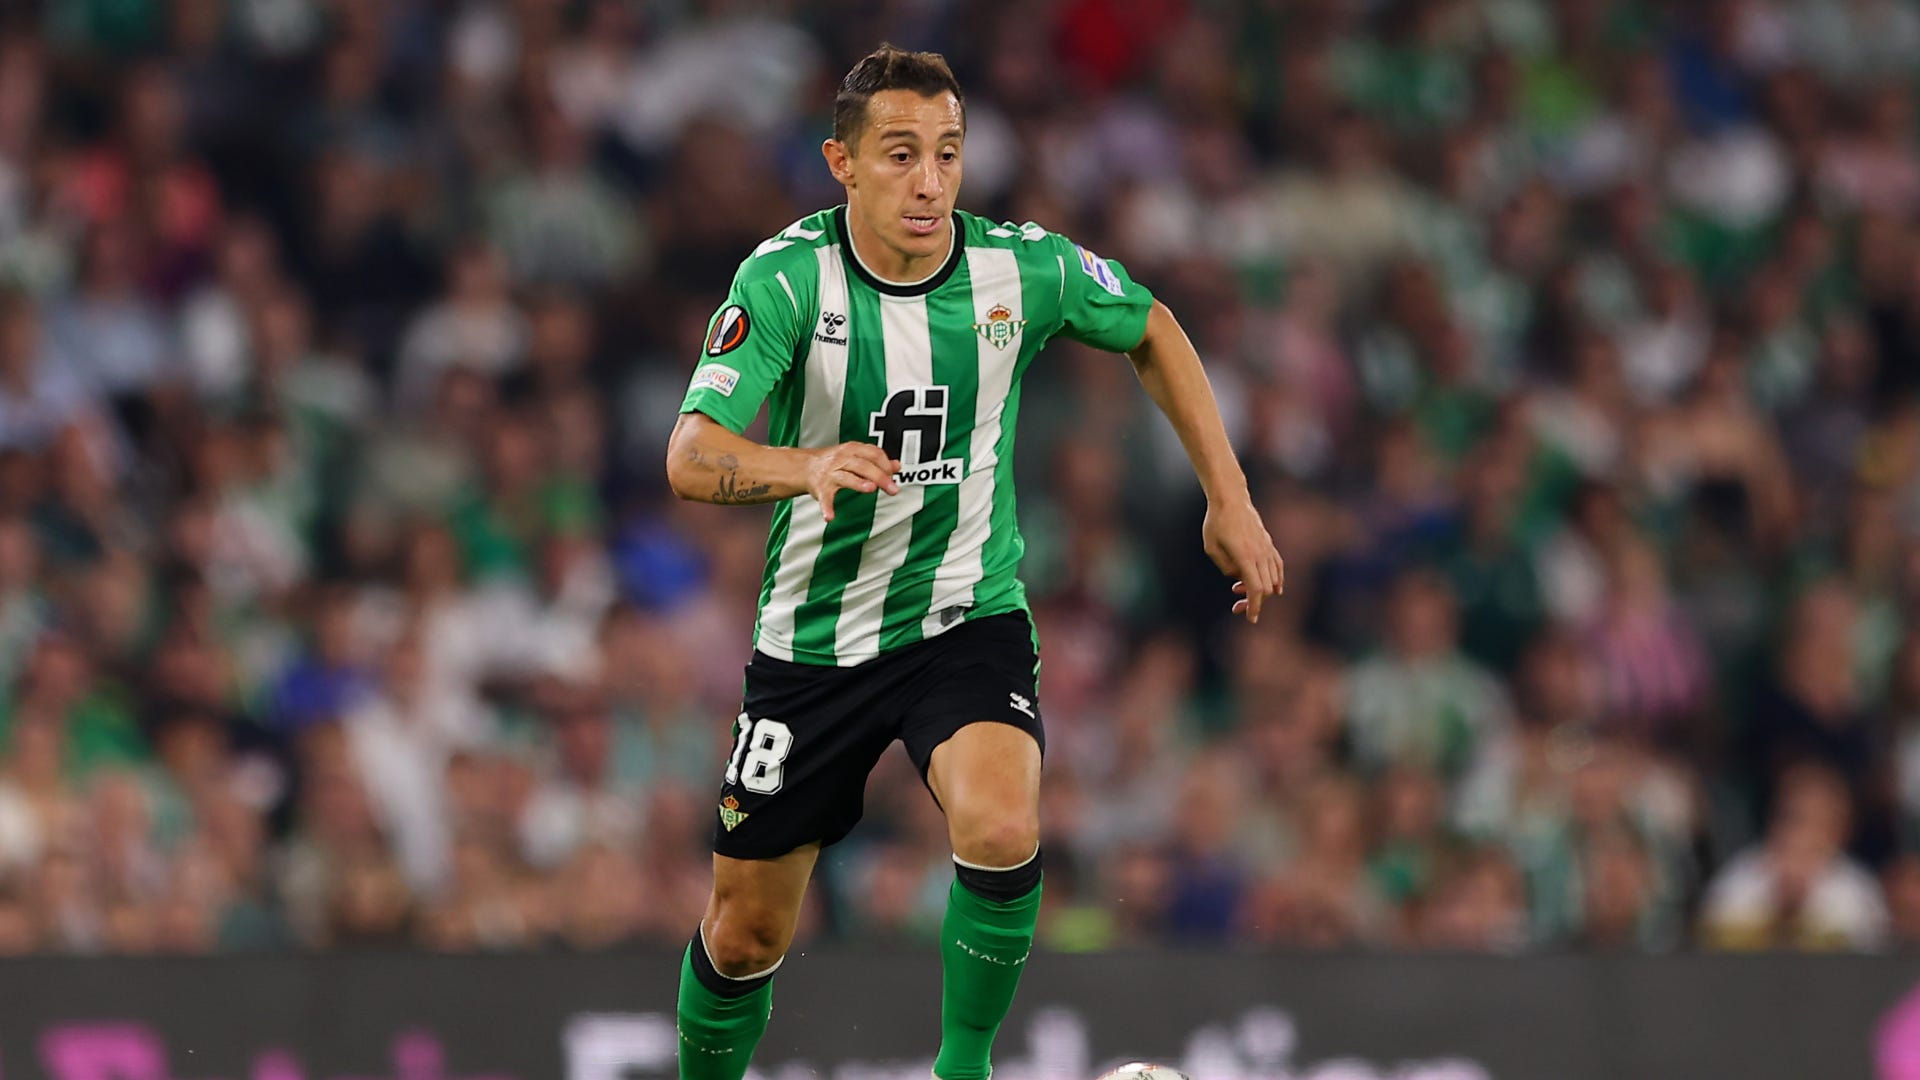 Cadiz vs Real Betis Live stream, TV channel, kick-off time and how to watch Goal US